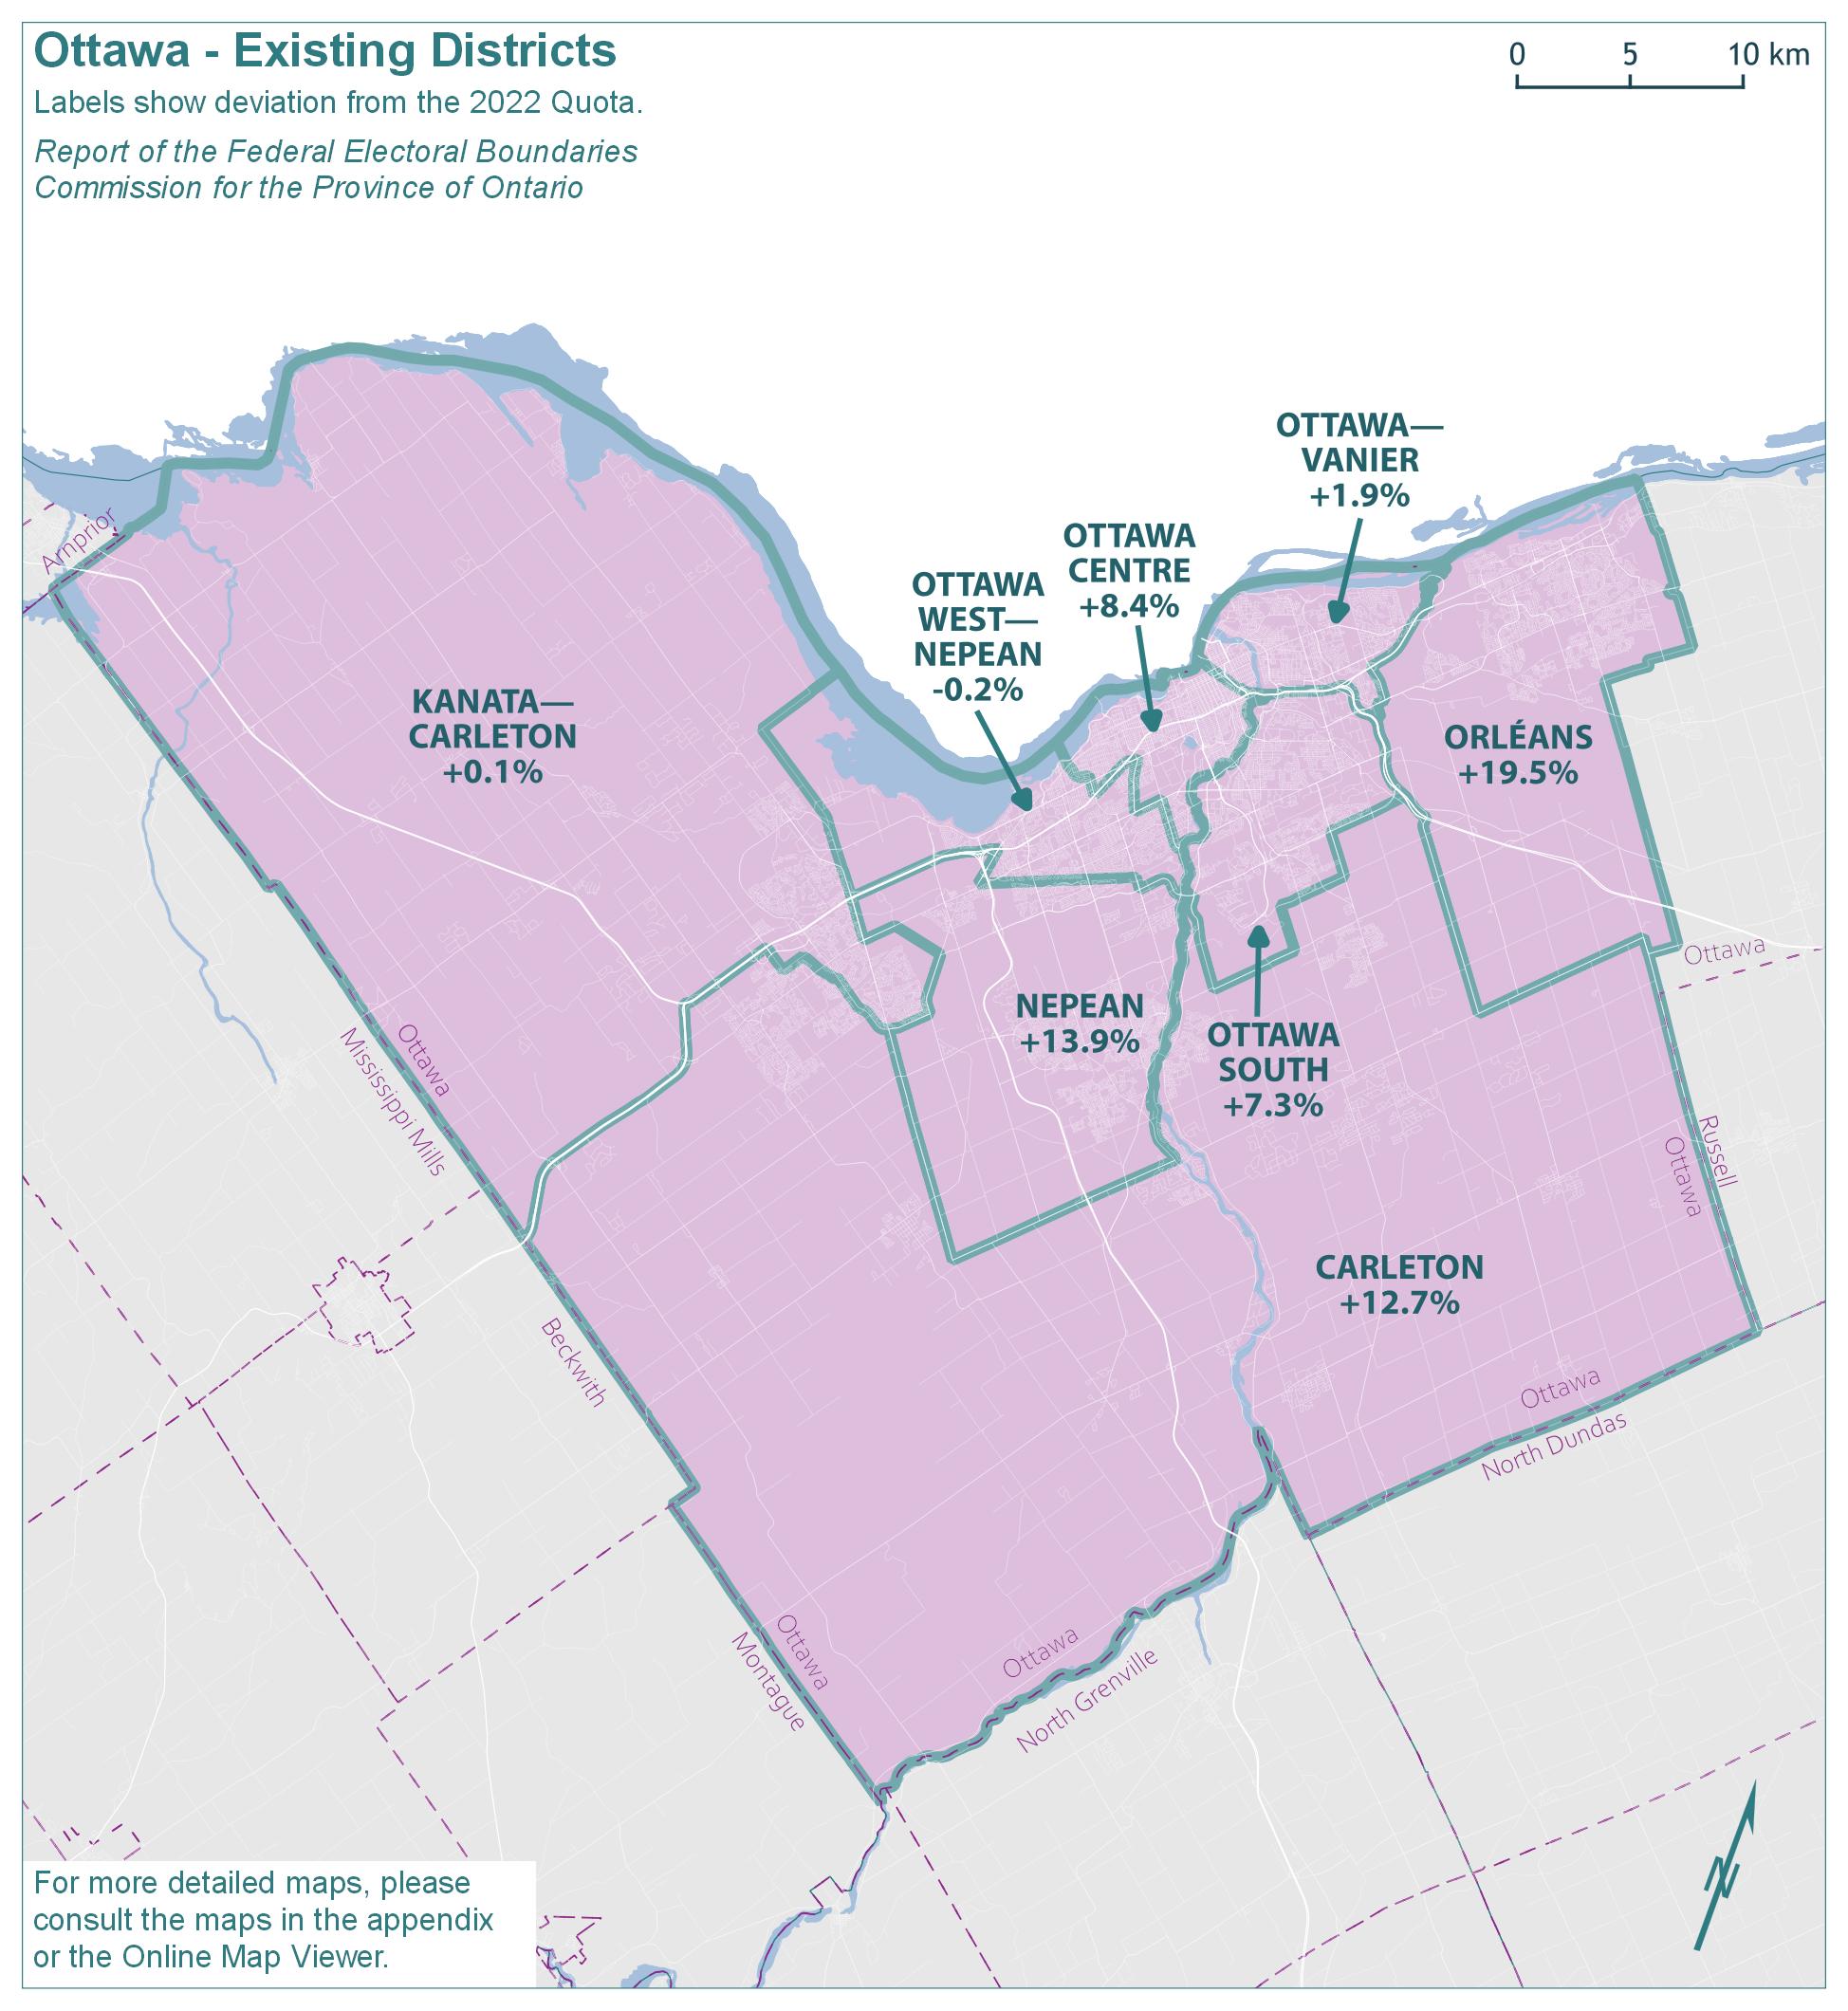 Ottawa - Existing Districts